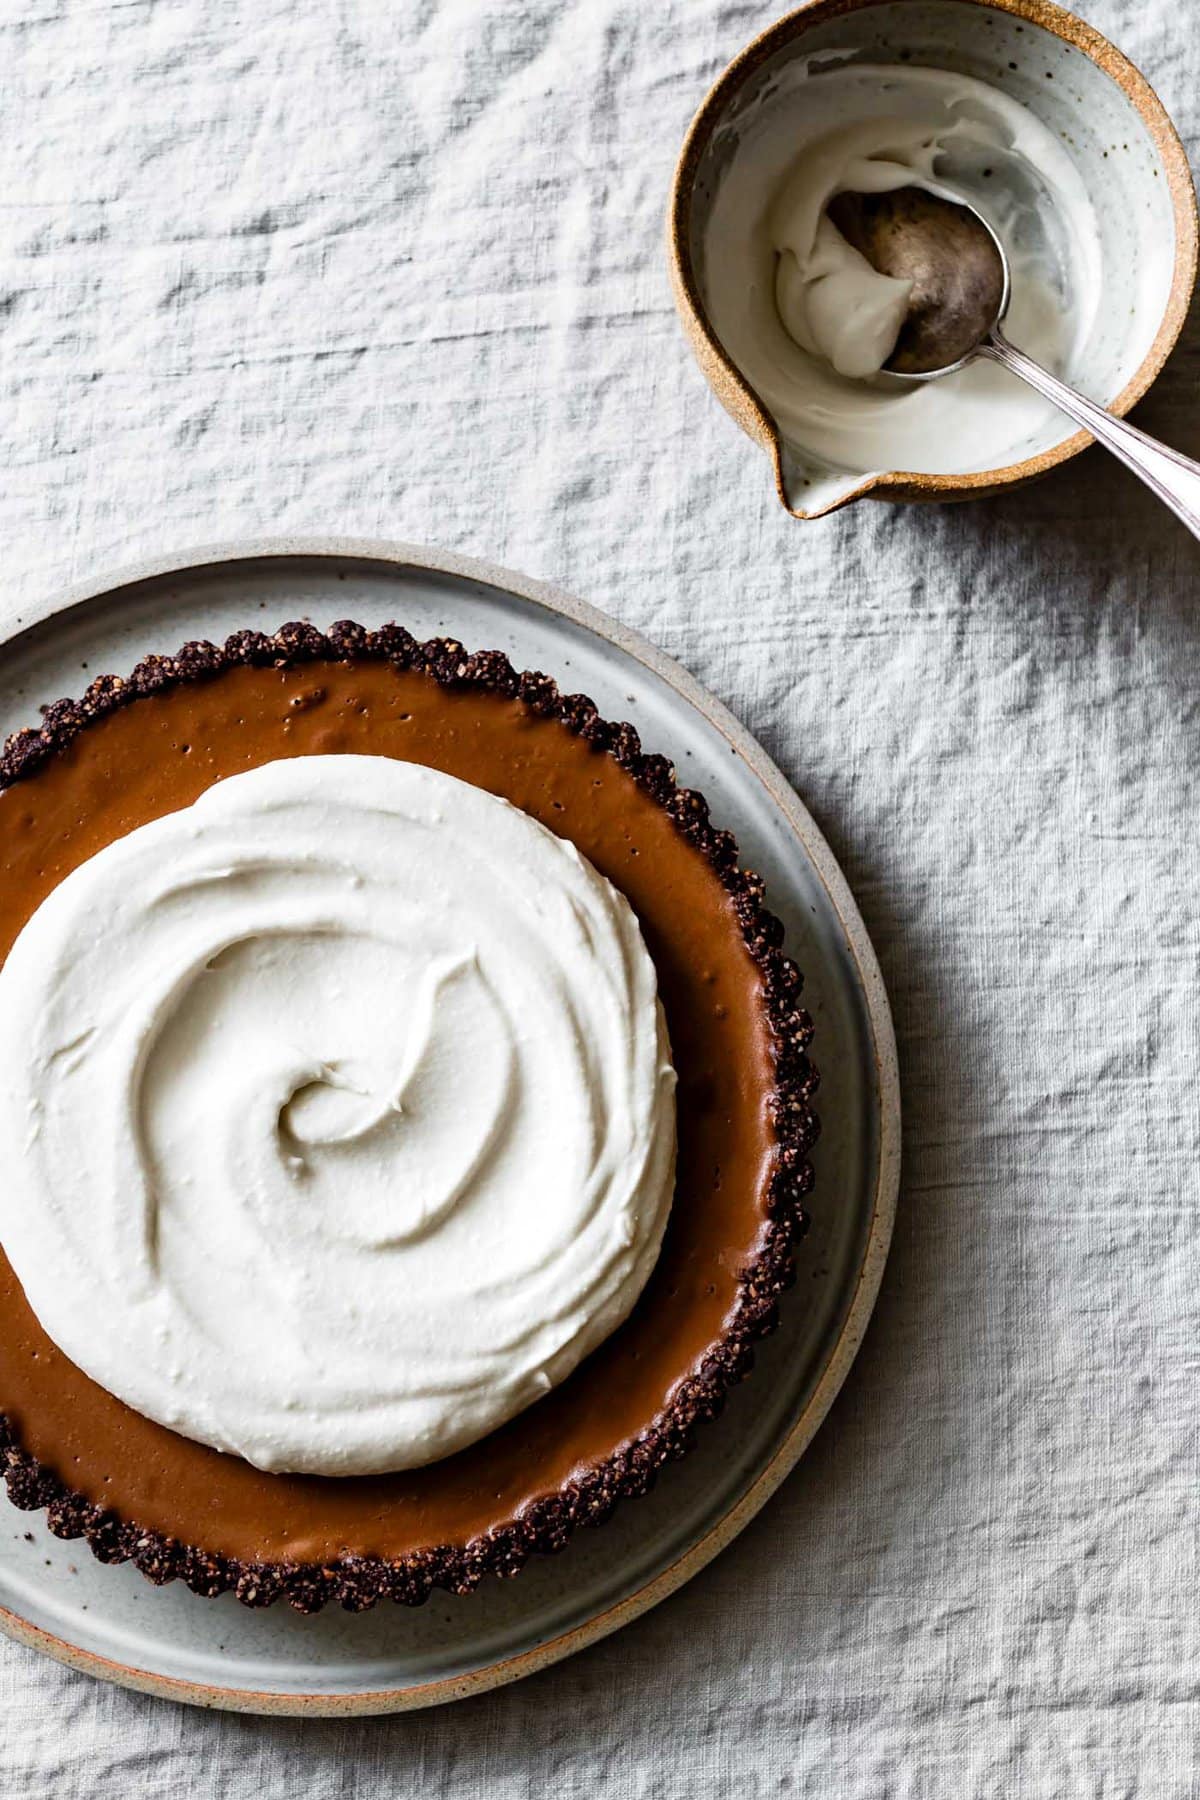 Whipped topping on a chocolate tart